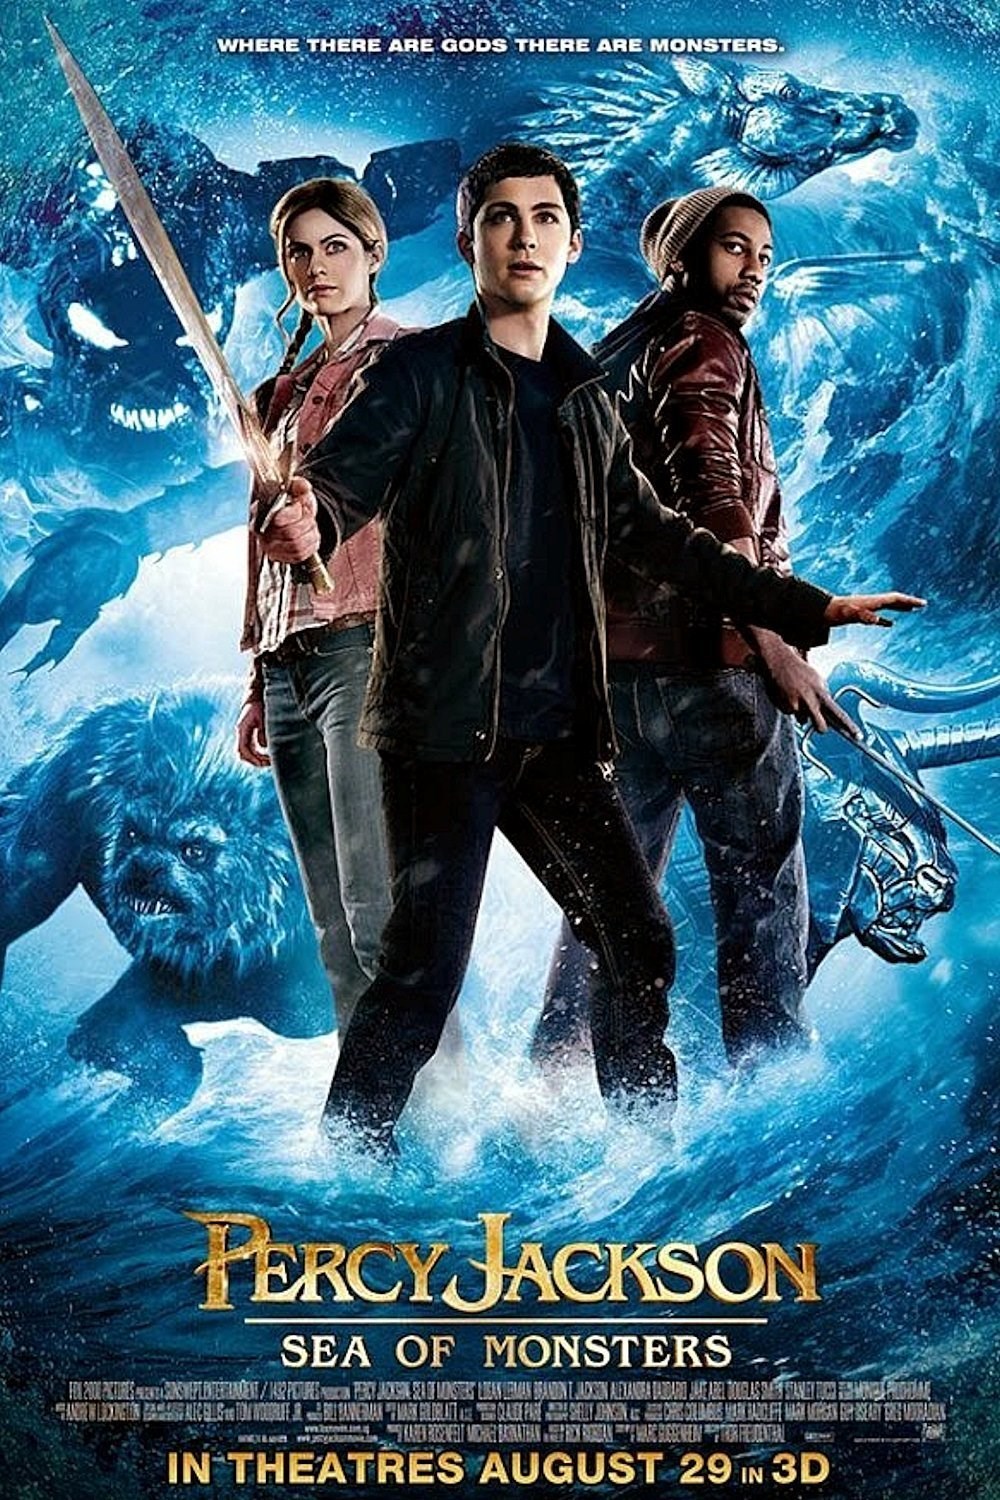 Percy jackson: sea of monsters 2013